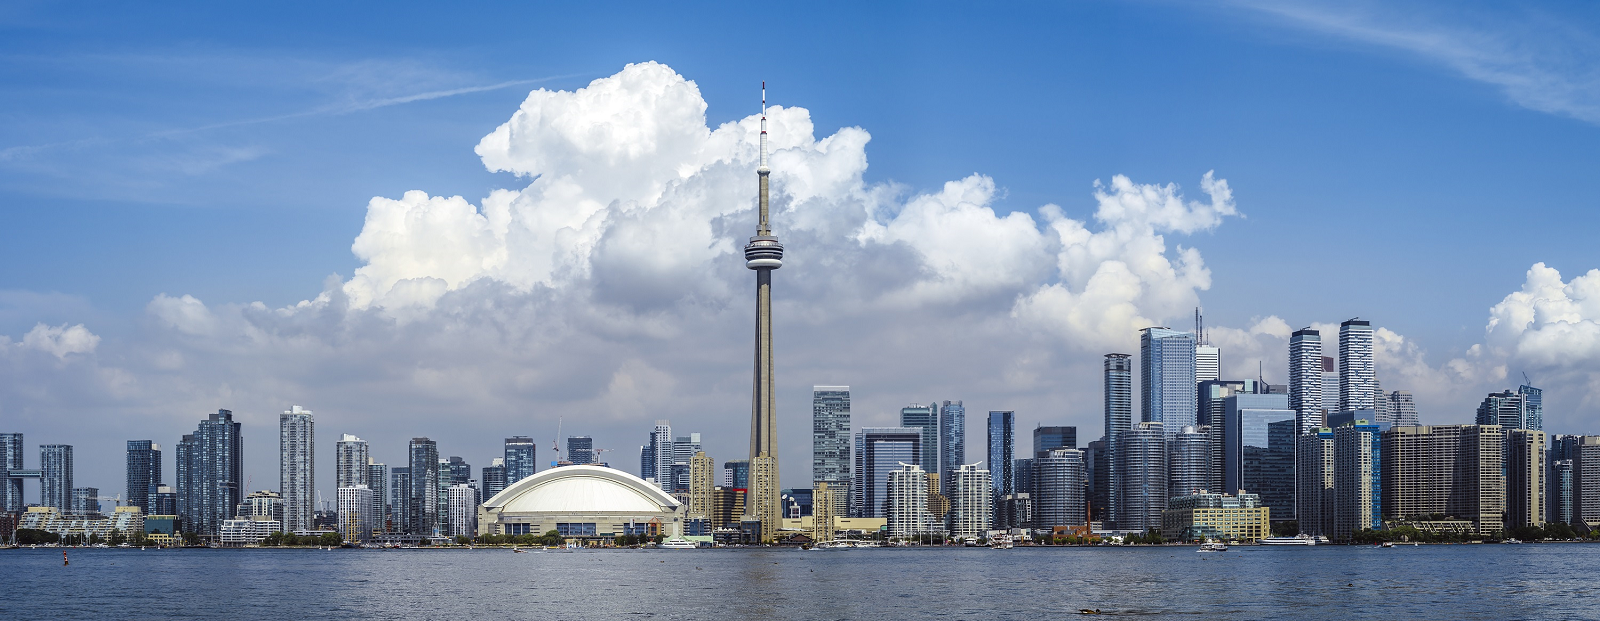 Toronto, CA - Conflict Resolution and Mediation Training